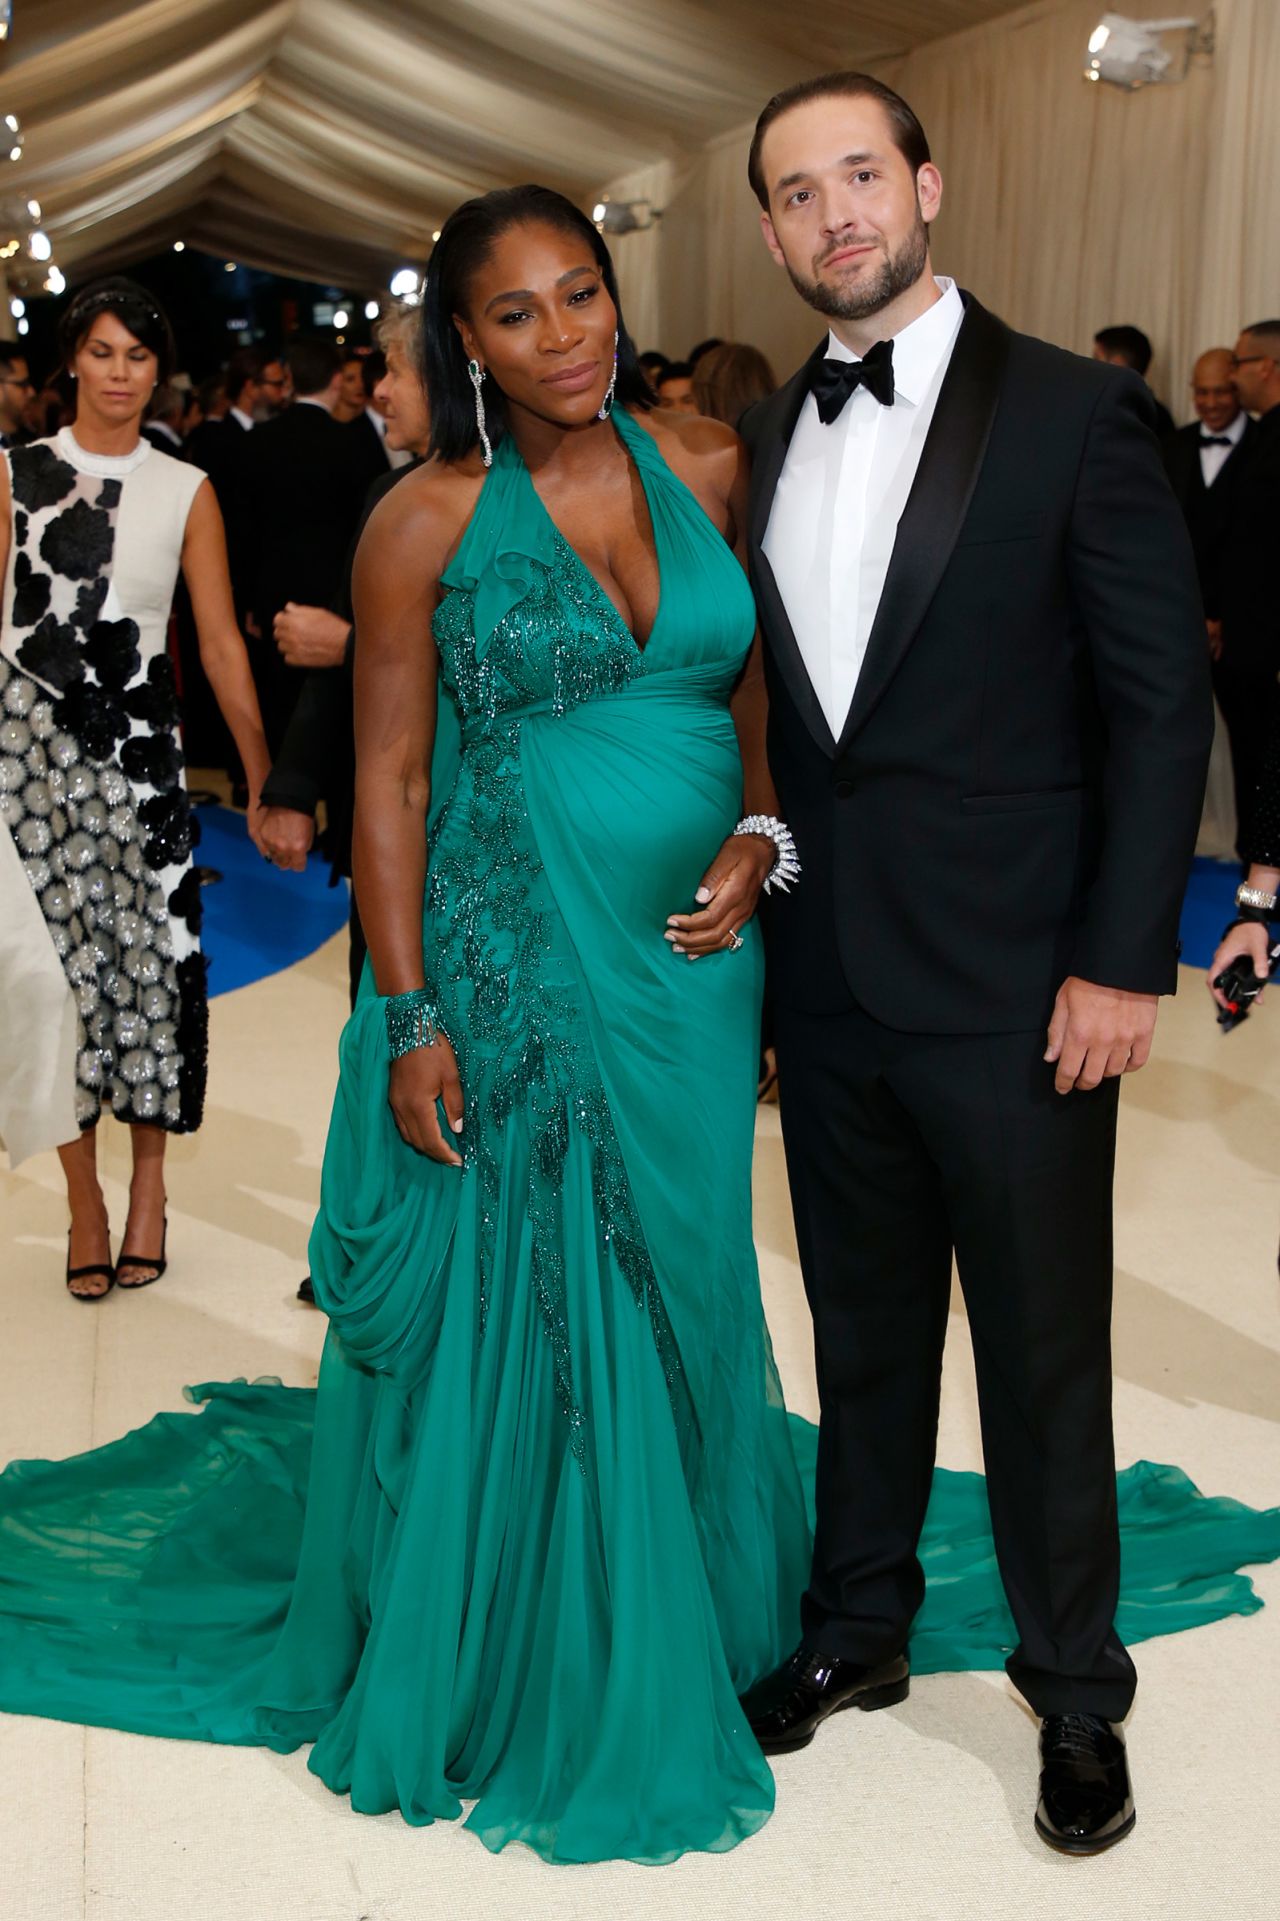 Williams and her fiance, Alexis Ohanian, attend the Met Gala in New York in 2017. Williams, who was pregnant with their first child, has spoken candidly about the <a href="https://www.cnn.com/2018/01/10/health/serena-williams-birth-c-section-olympia-bn/index.html" target="_blank">complications she experienced</a> following childbirth.